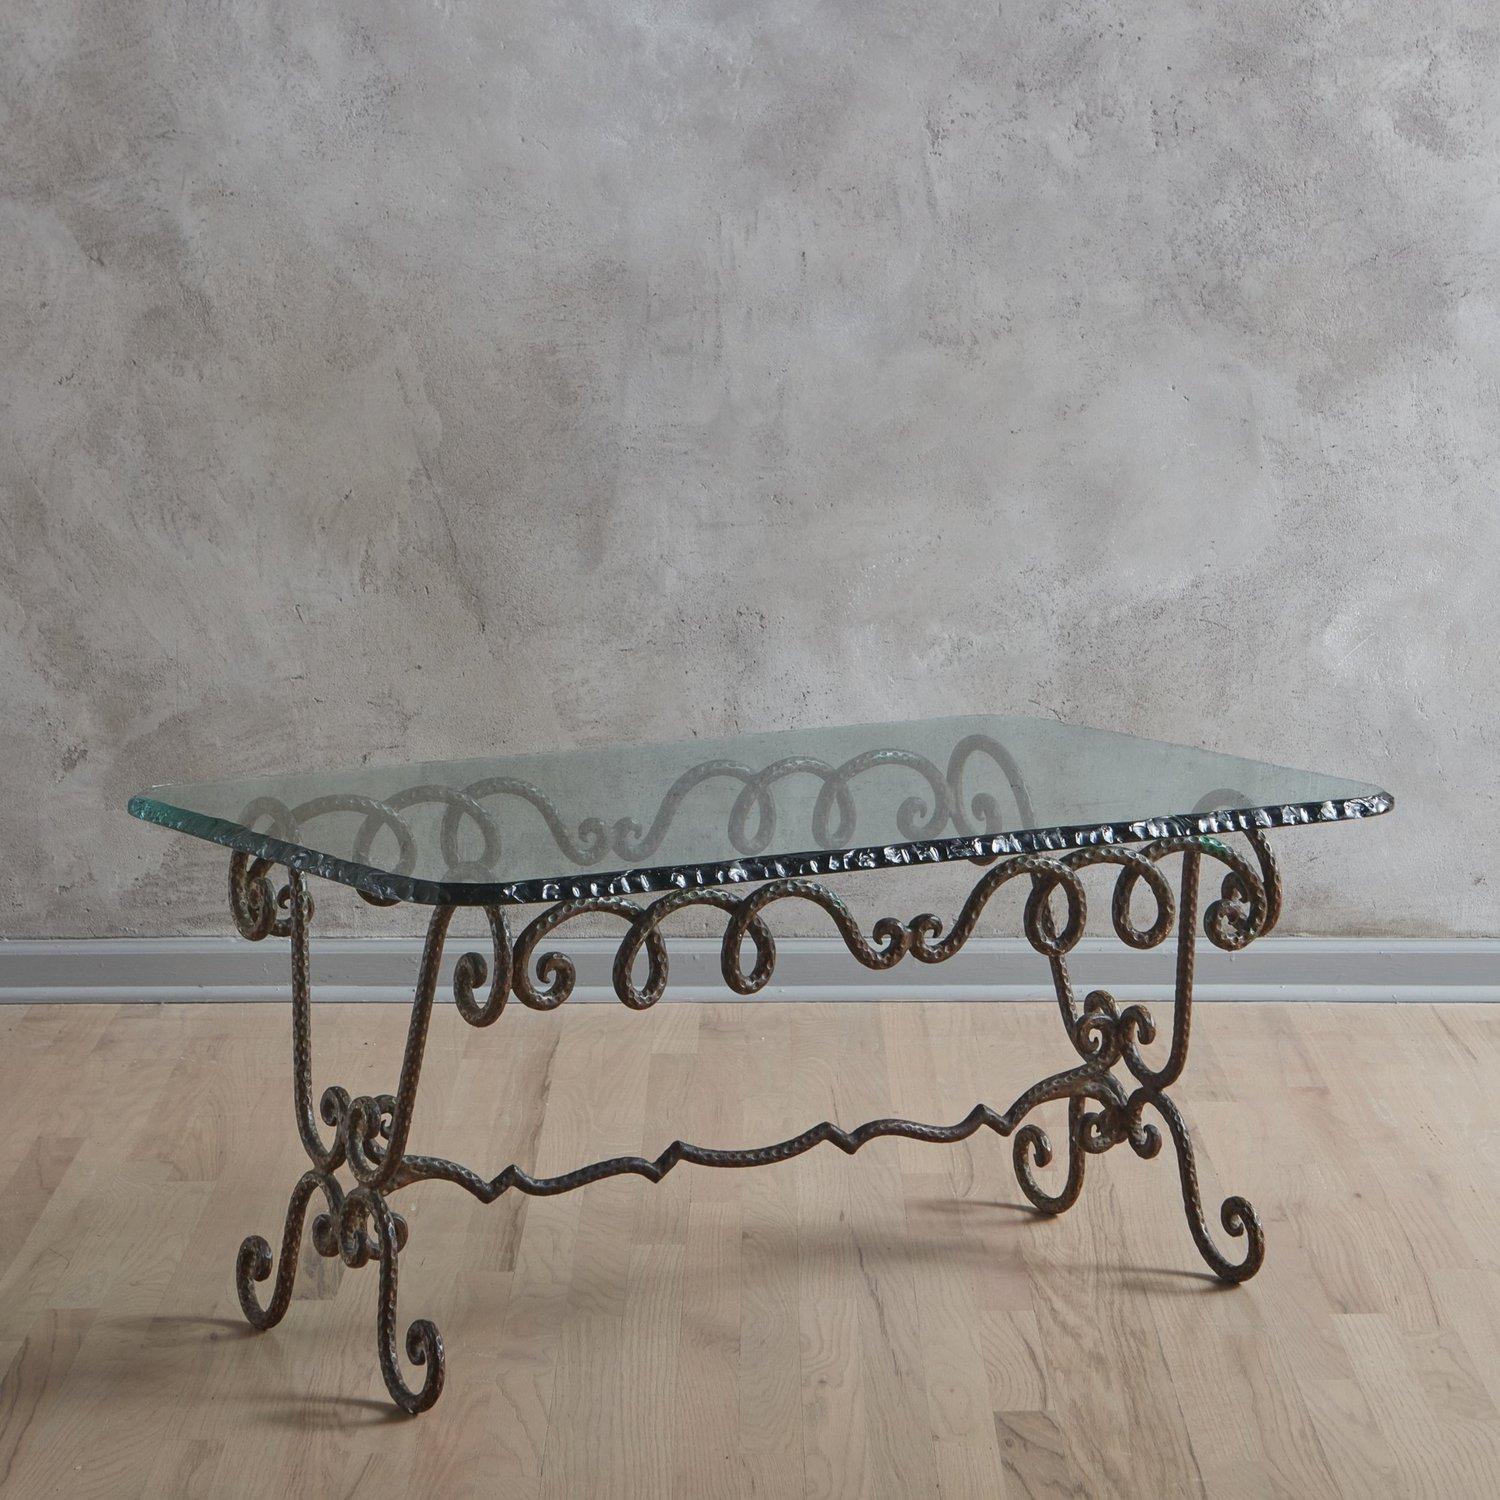 A 1960s Italian coffee table in the style of Garouste & Bonetti. This table features a sculptural, hand forged iron base with scroll details, a hammered finish and a center stretcher. It has a 1” thick rectangular glass tabletop with curved corners